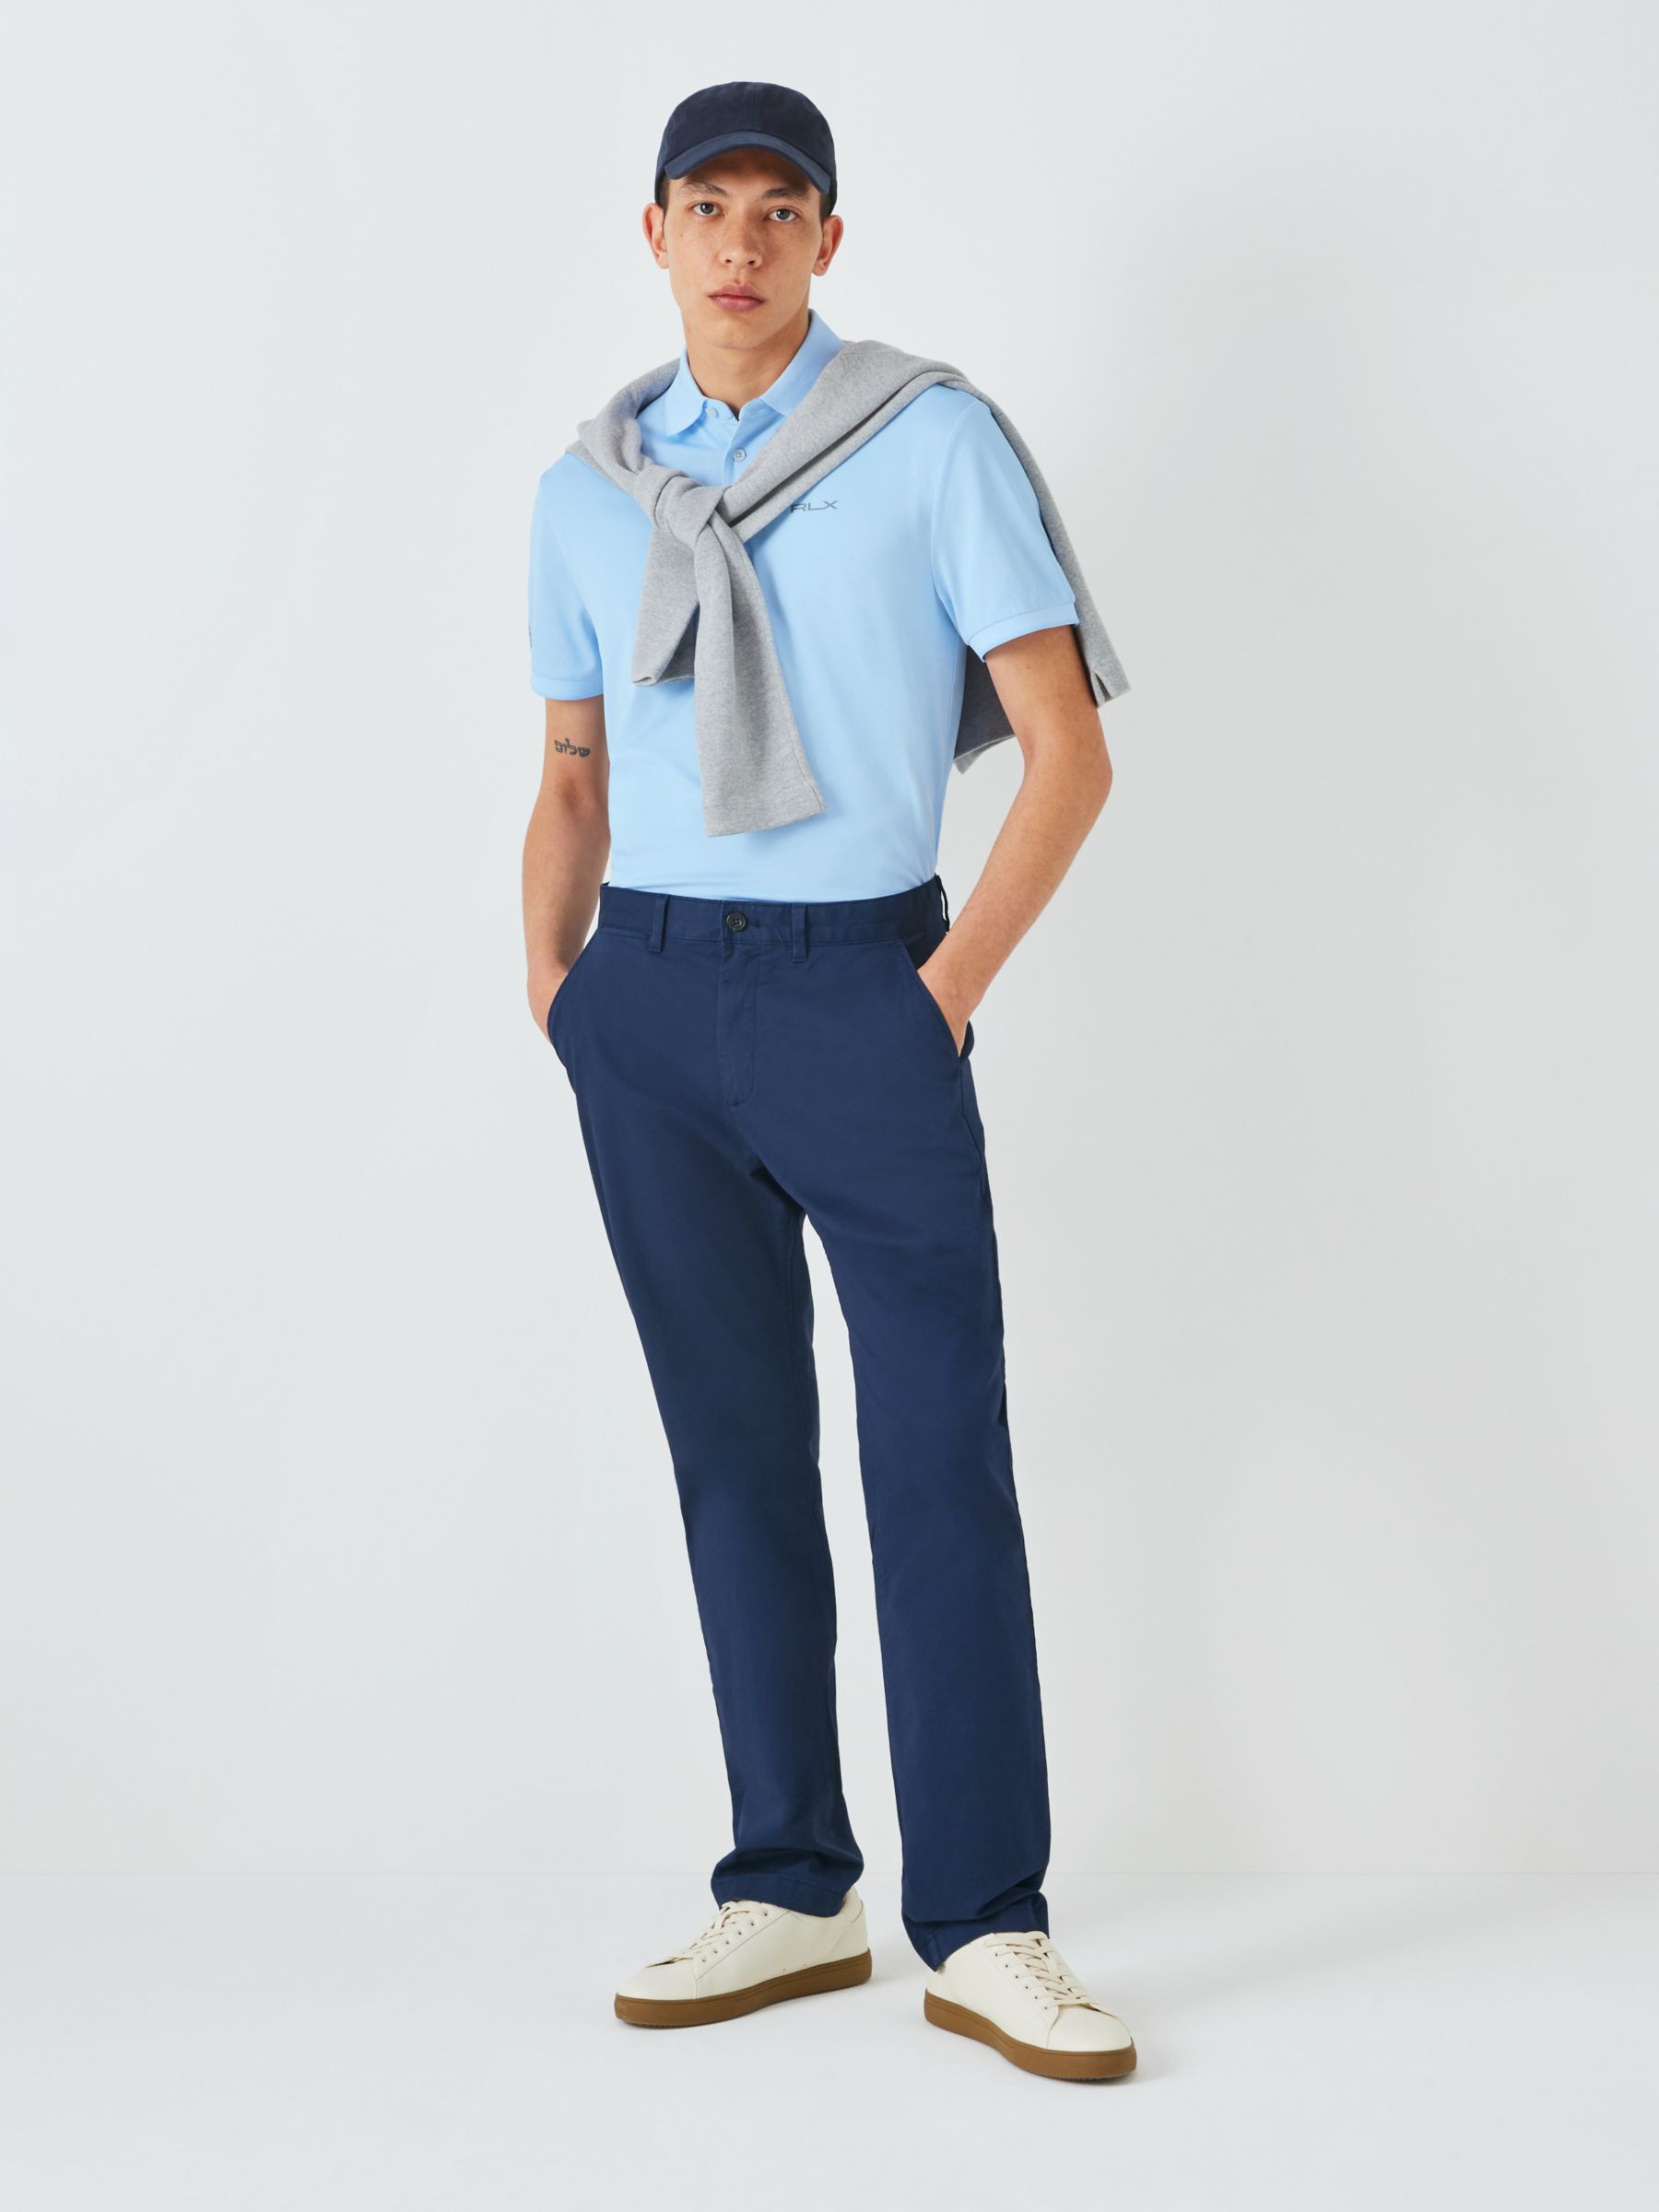 Buy Polo Golf RLX Ralph Lauren Tailored Fit Performance Polo Shirt, Office Blue Online at johnlewis.com